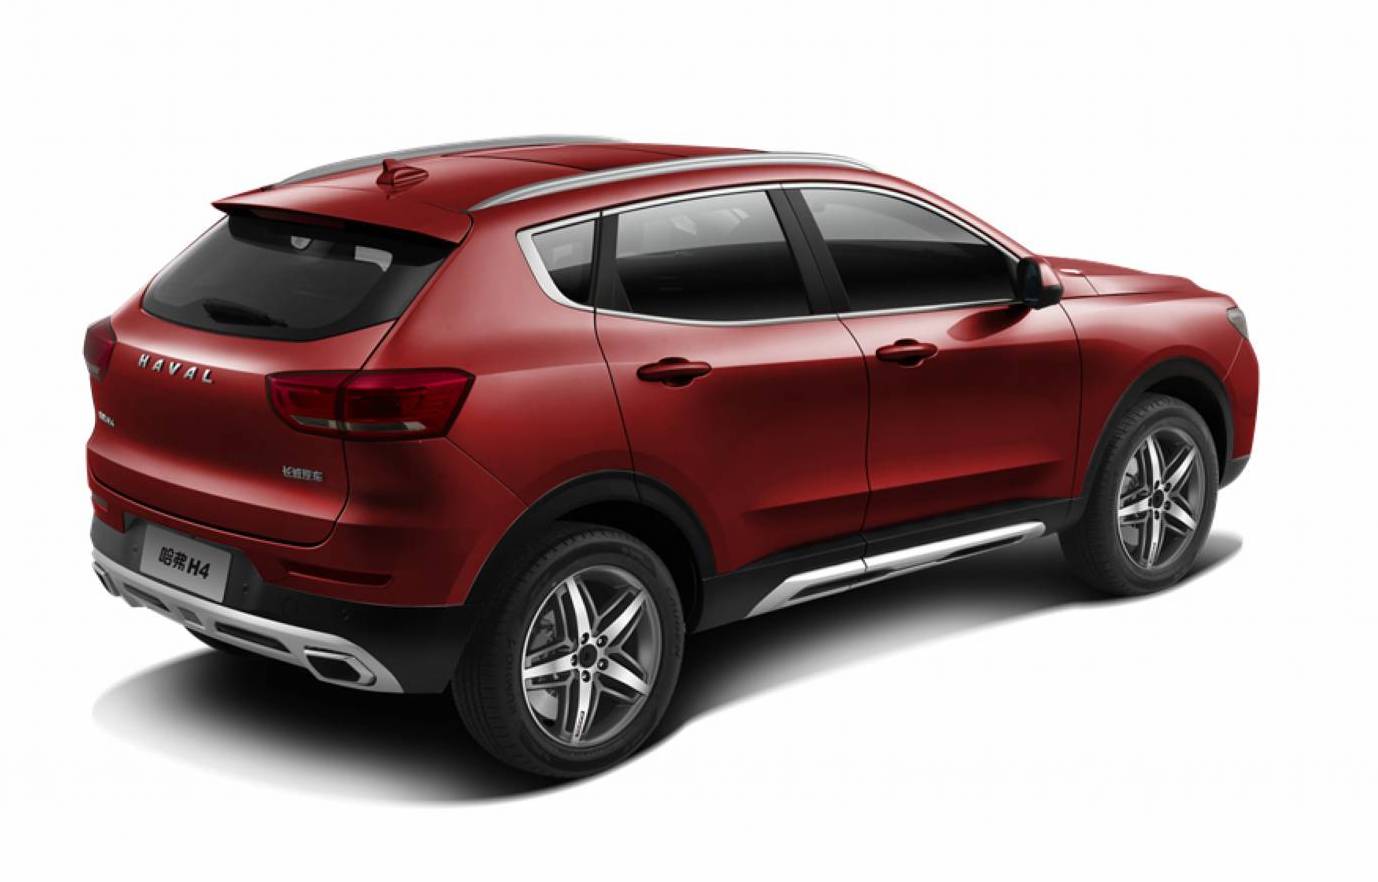 2018 Haval H4 medium-size SUV revealed, for China only | PerformanceDrive